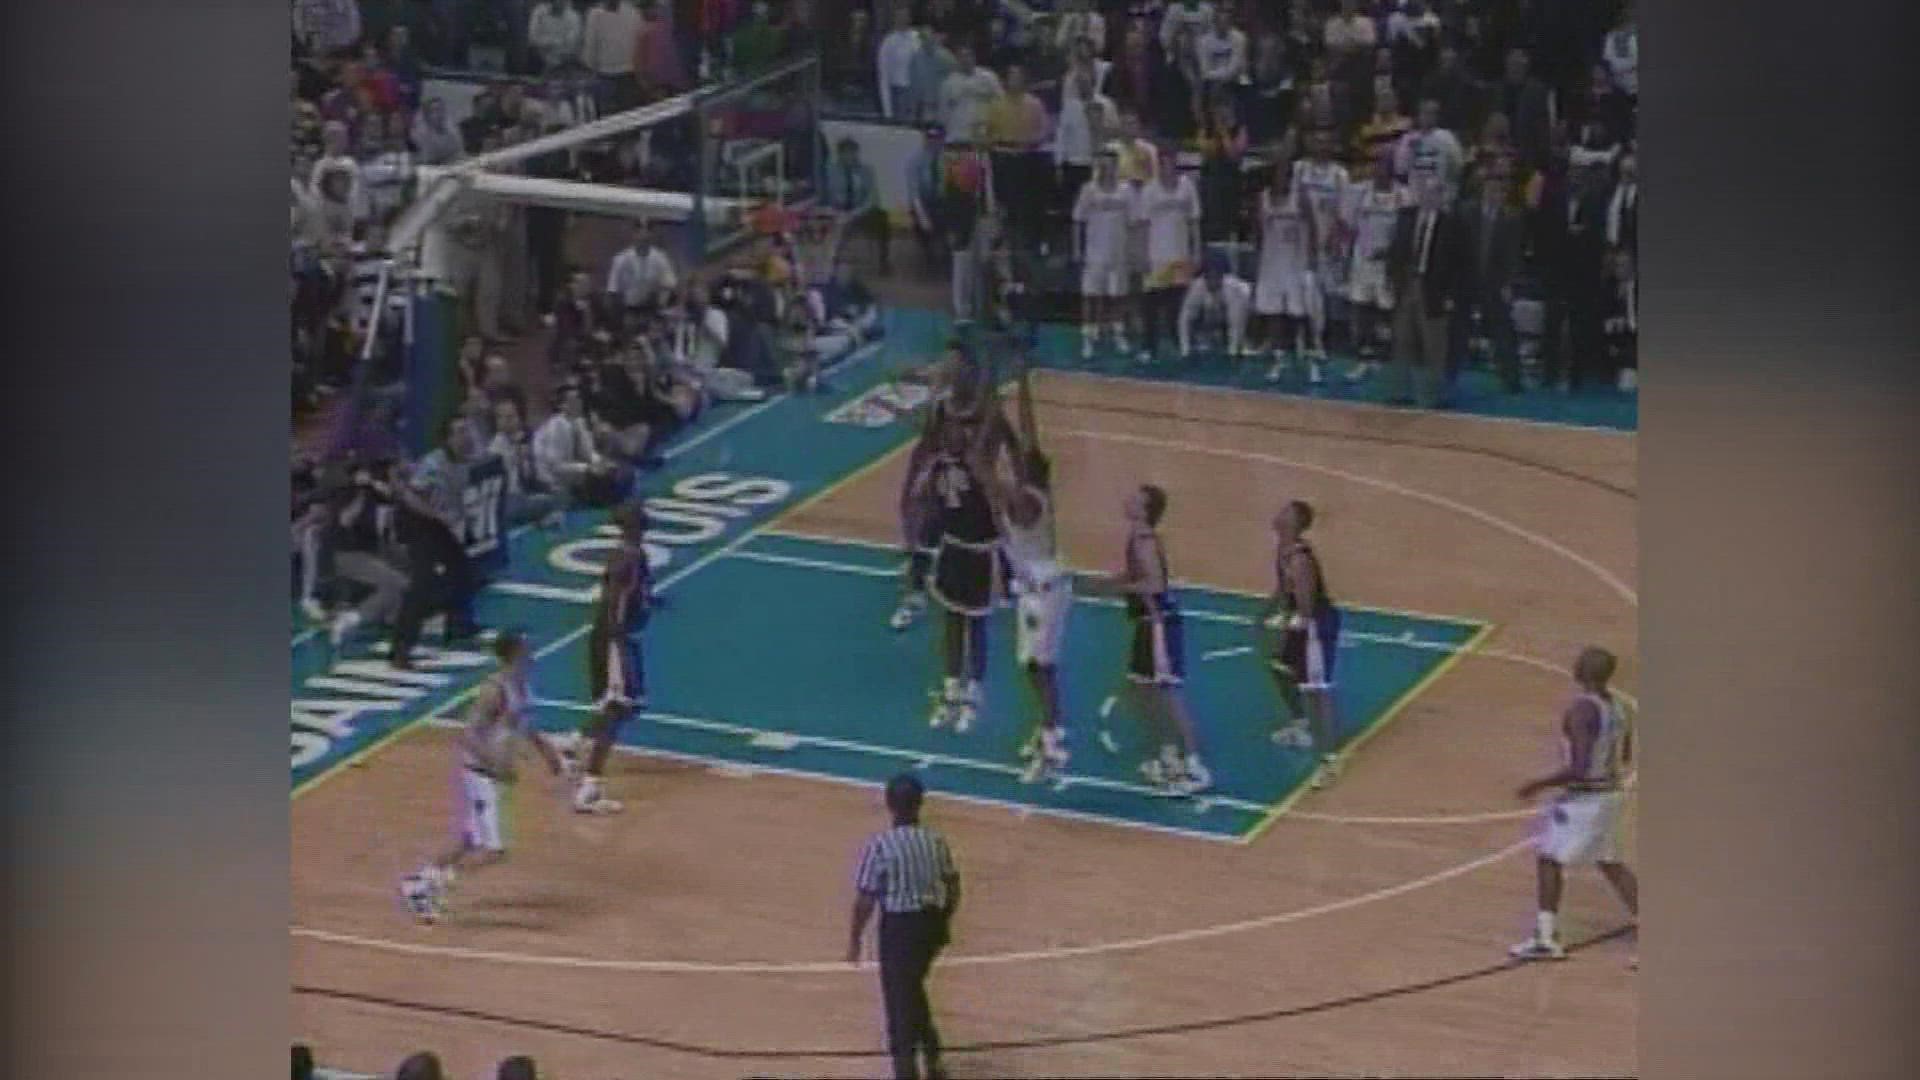 Christmas in St. Louis isn't complete without the Braggin' Rights game, but nothing compares to the Missouri vs. Illinois game at the old arena in 1993.